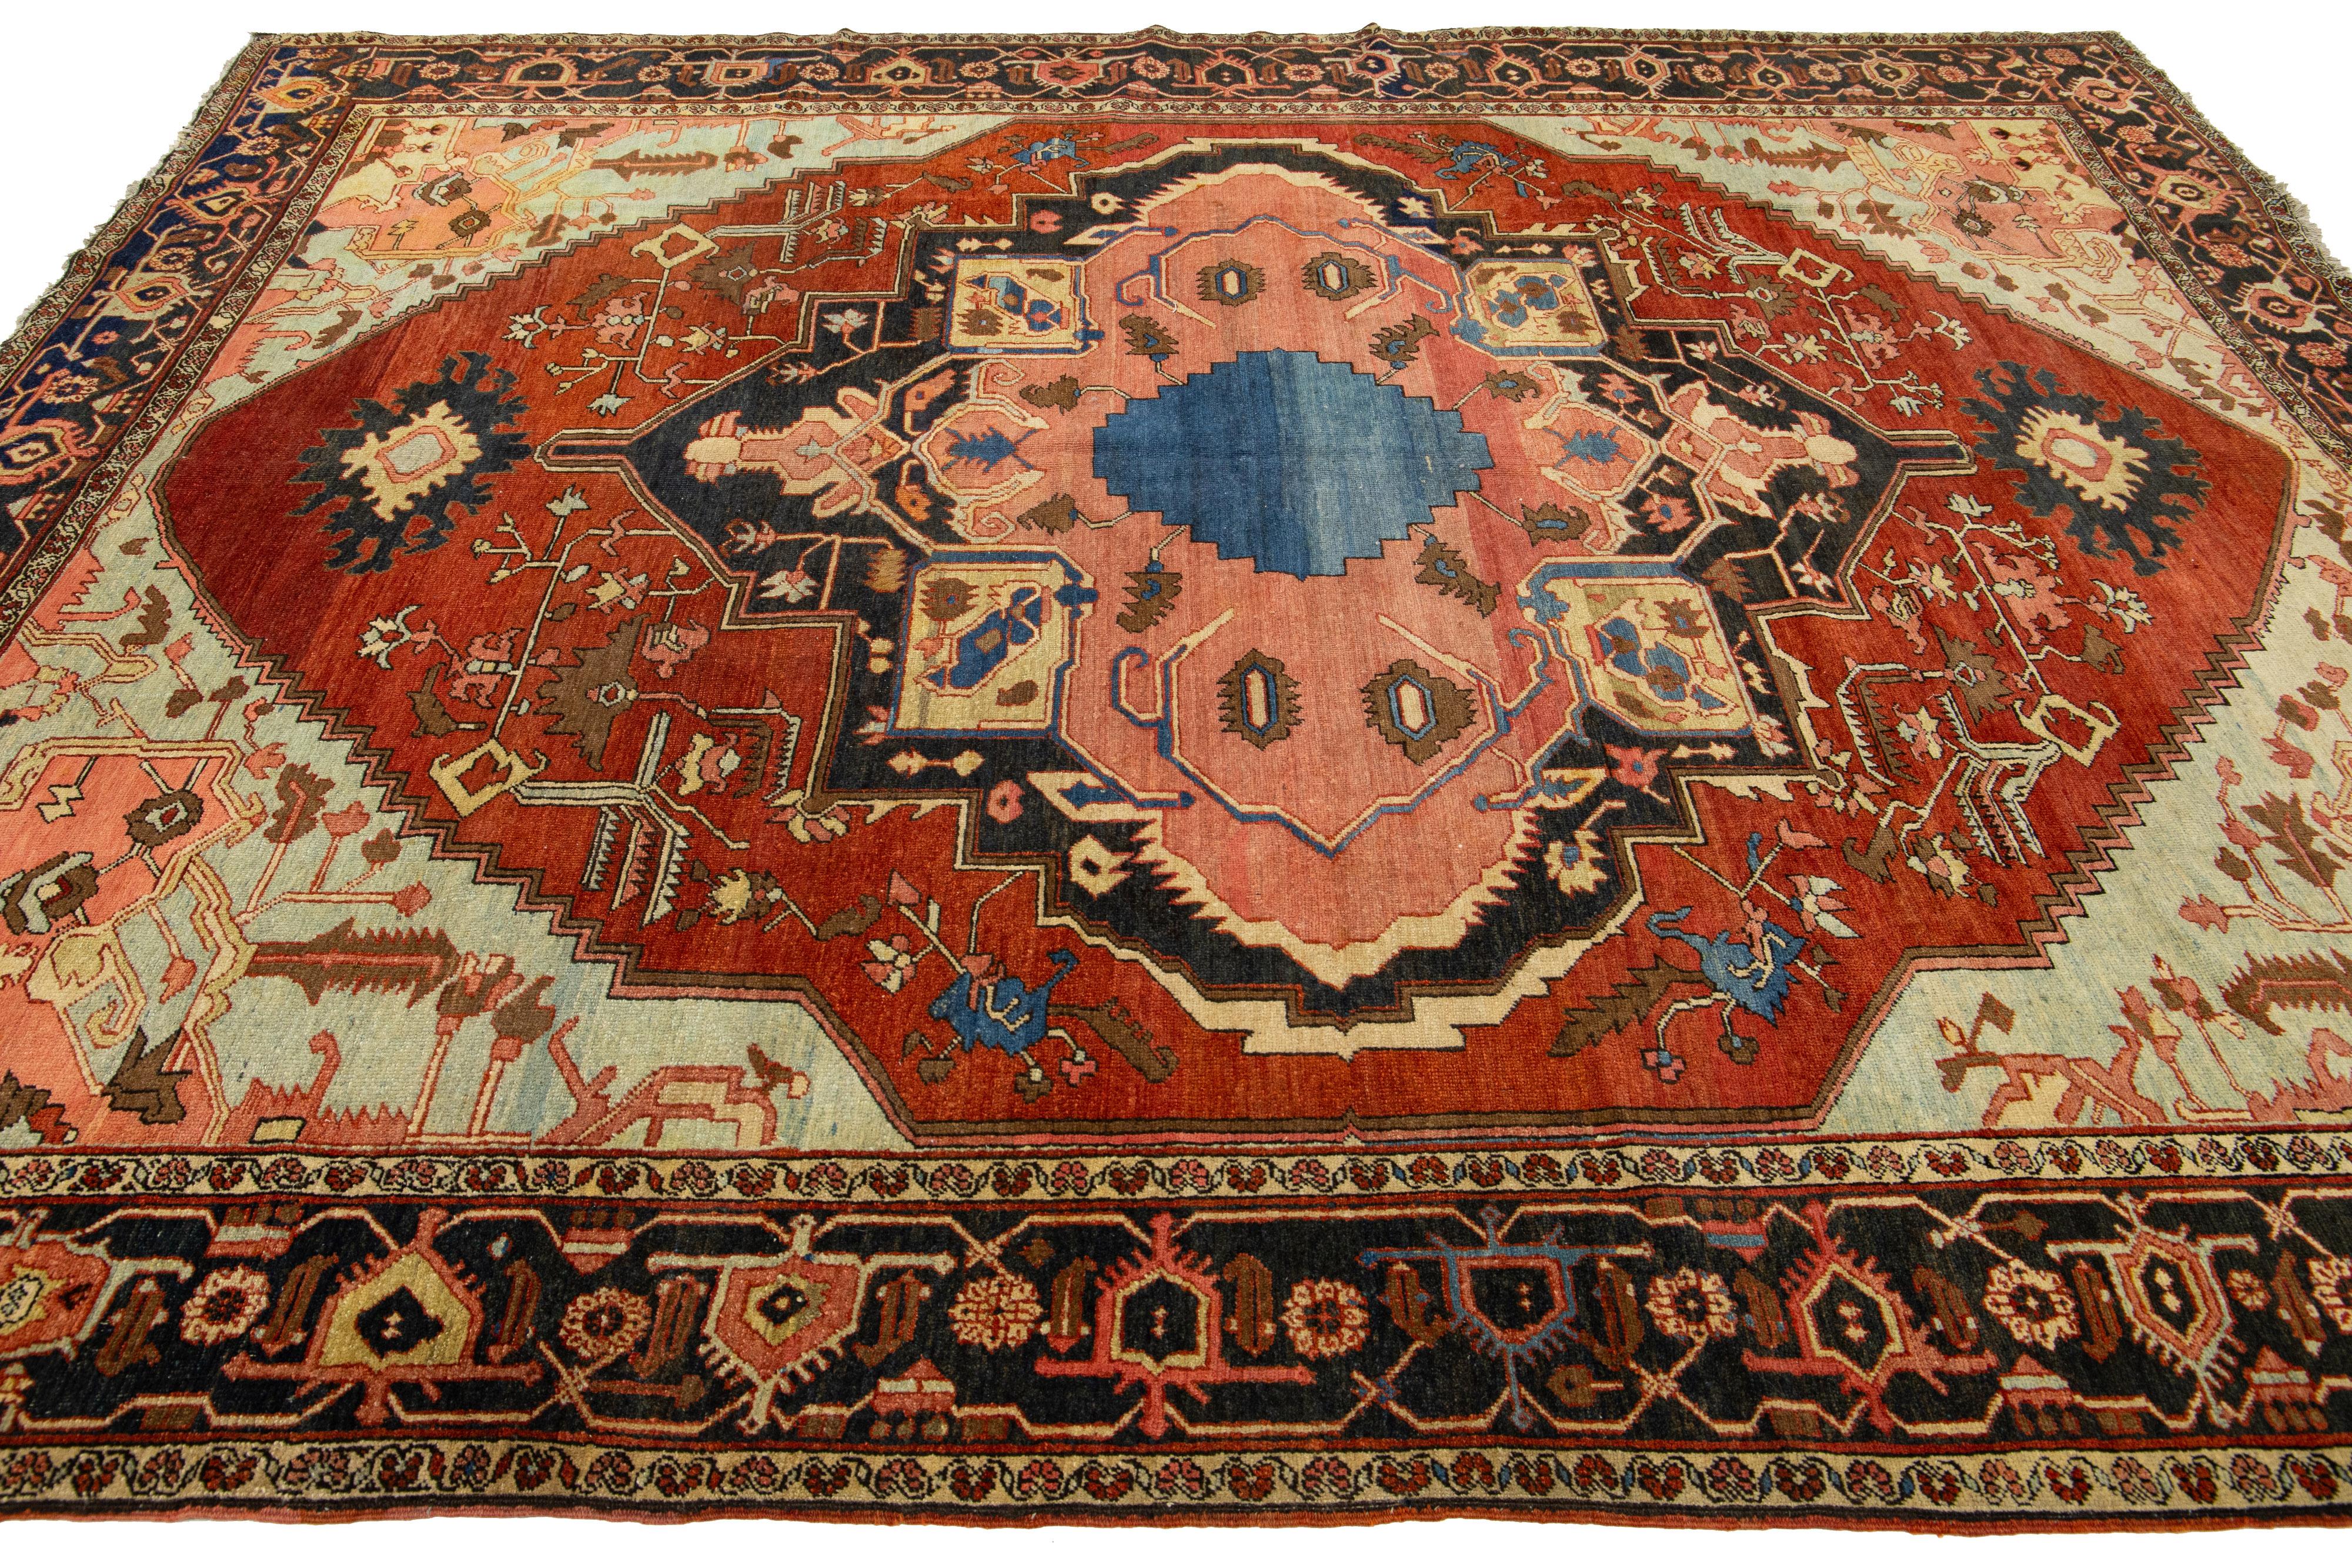 1870s Antique Wool Rug Persian Serapi Featuring a Medallion Motif In Rust Color In Excellent Condition For Sale In Norwalk, CT